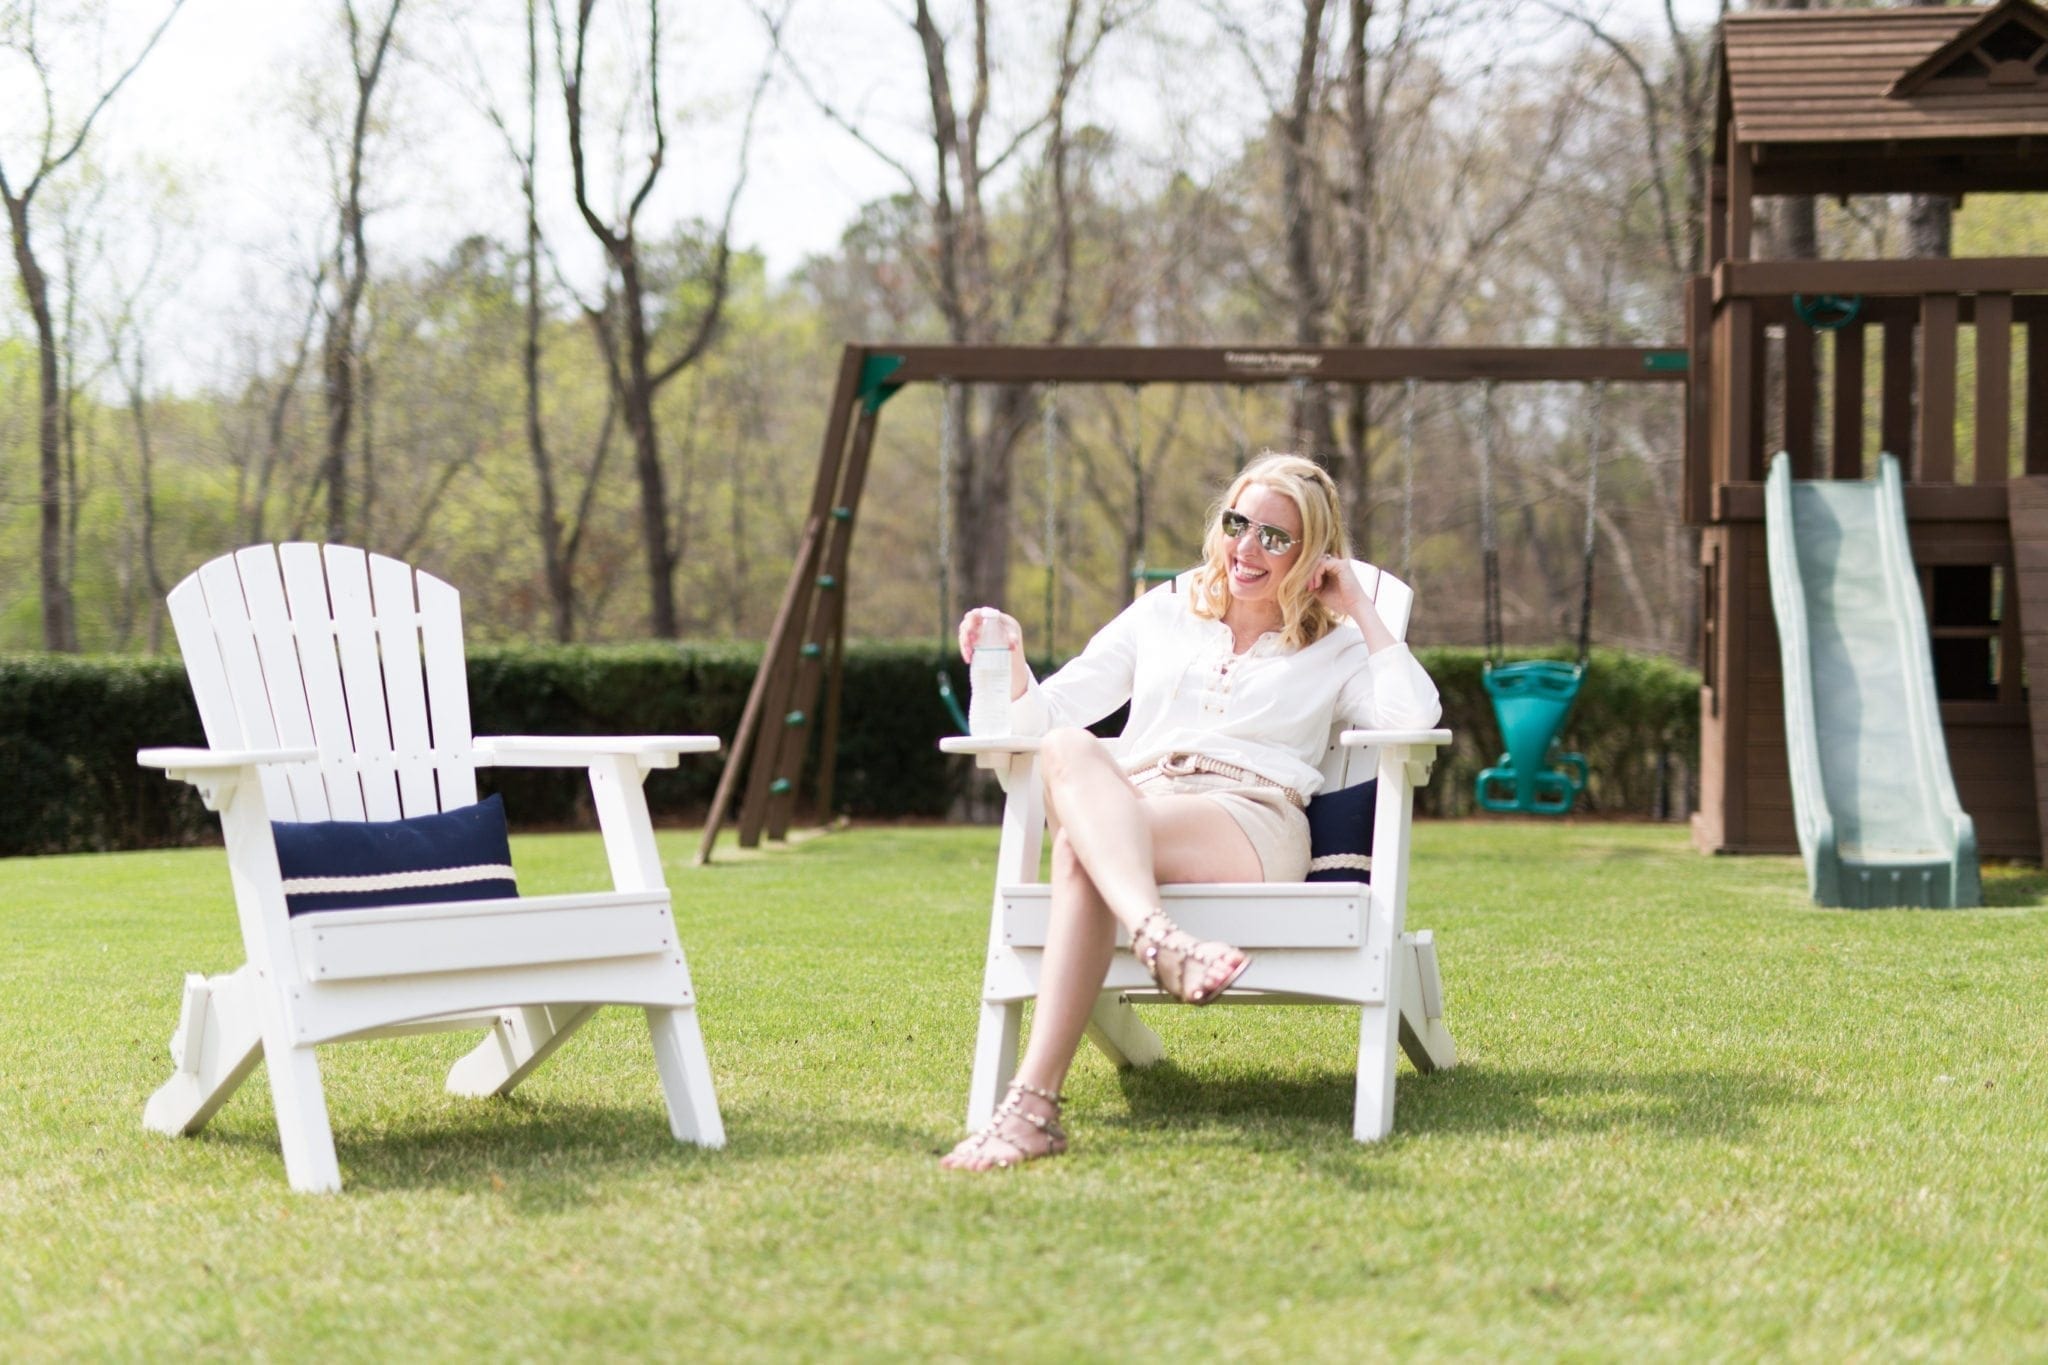 Adirondack chairs for backyard. Blue outdoor pillows. Valentino Rockstud sandals.